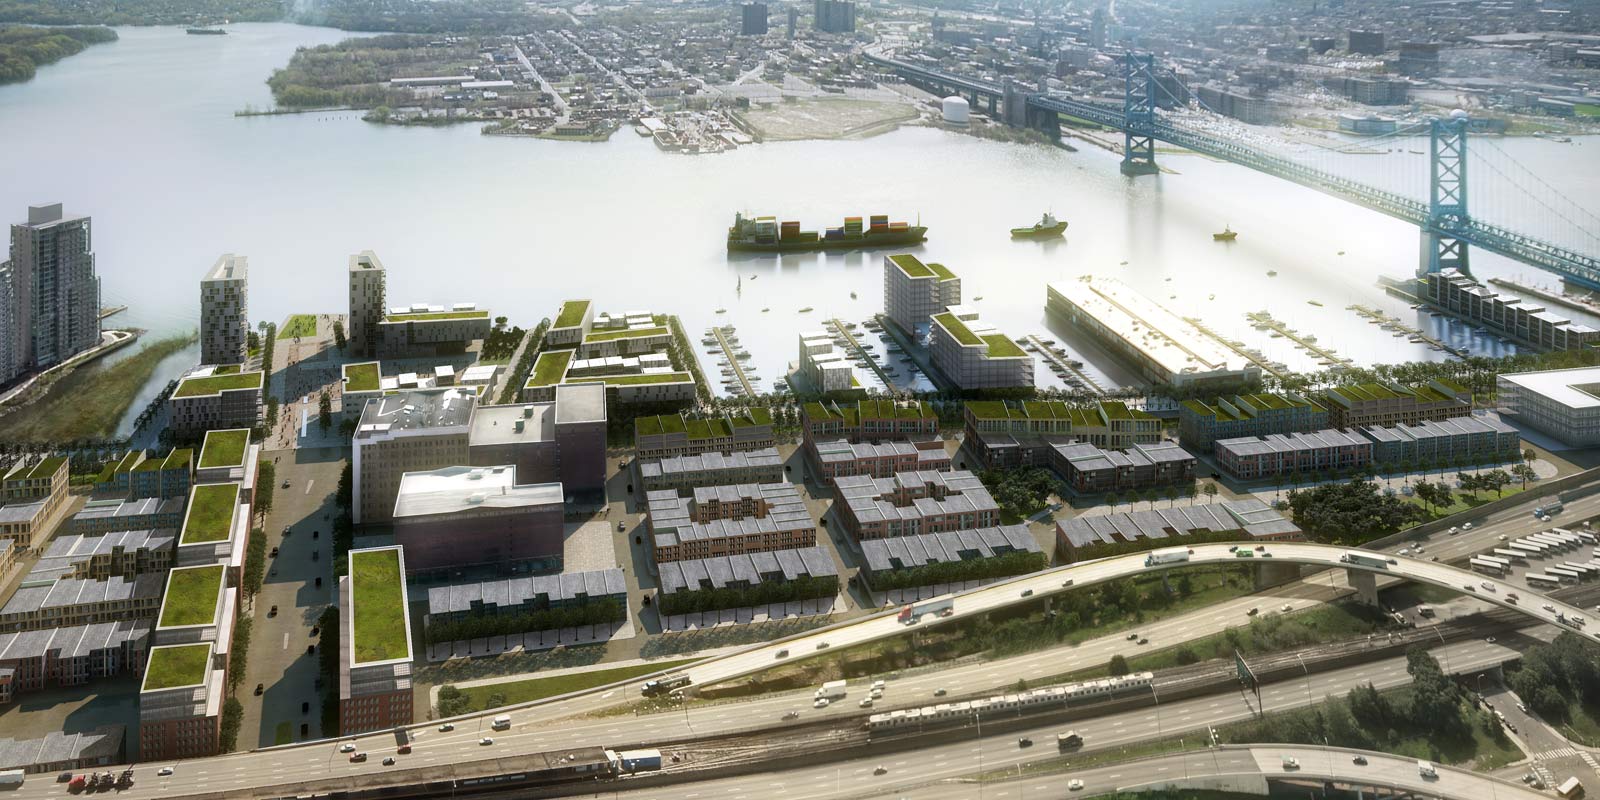 <p>This rendering shows mixed-use residential development at Festival Pier. The buildings will be organized around a new park and public plaza activated by restaurants, retail, and public events.</p>